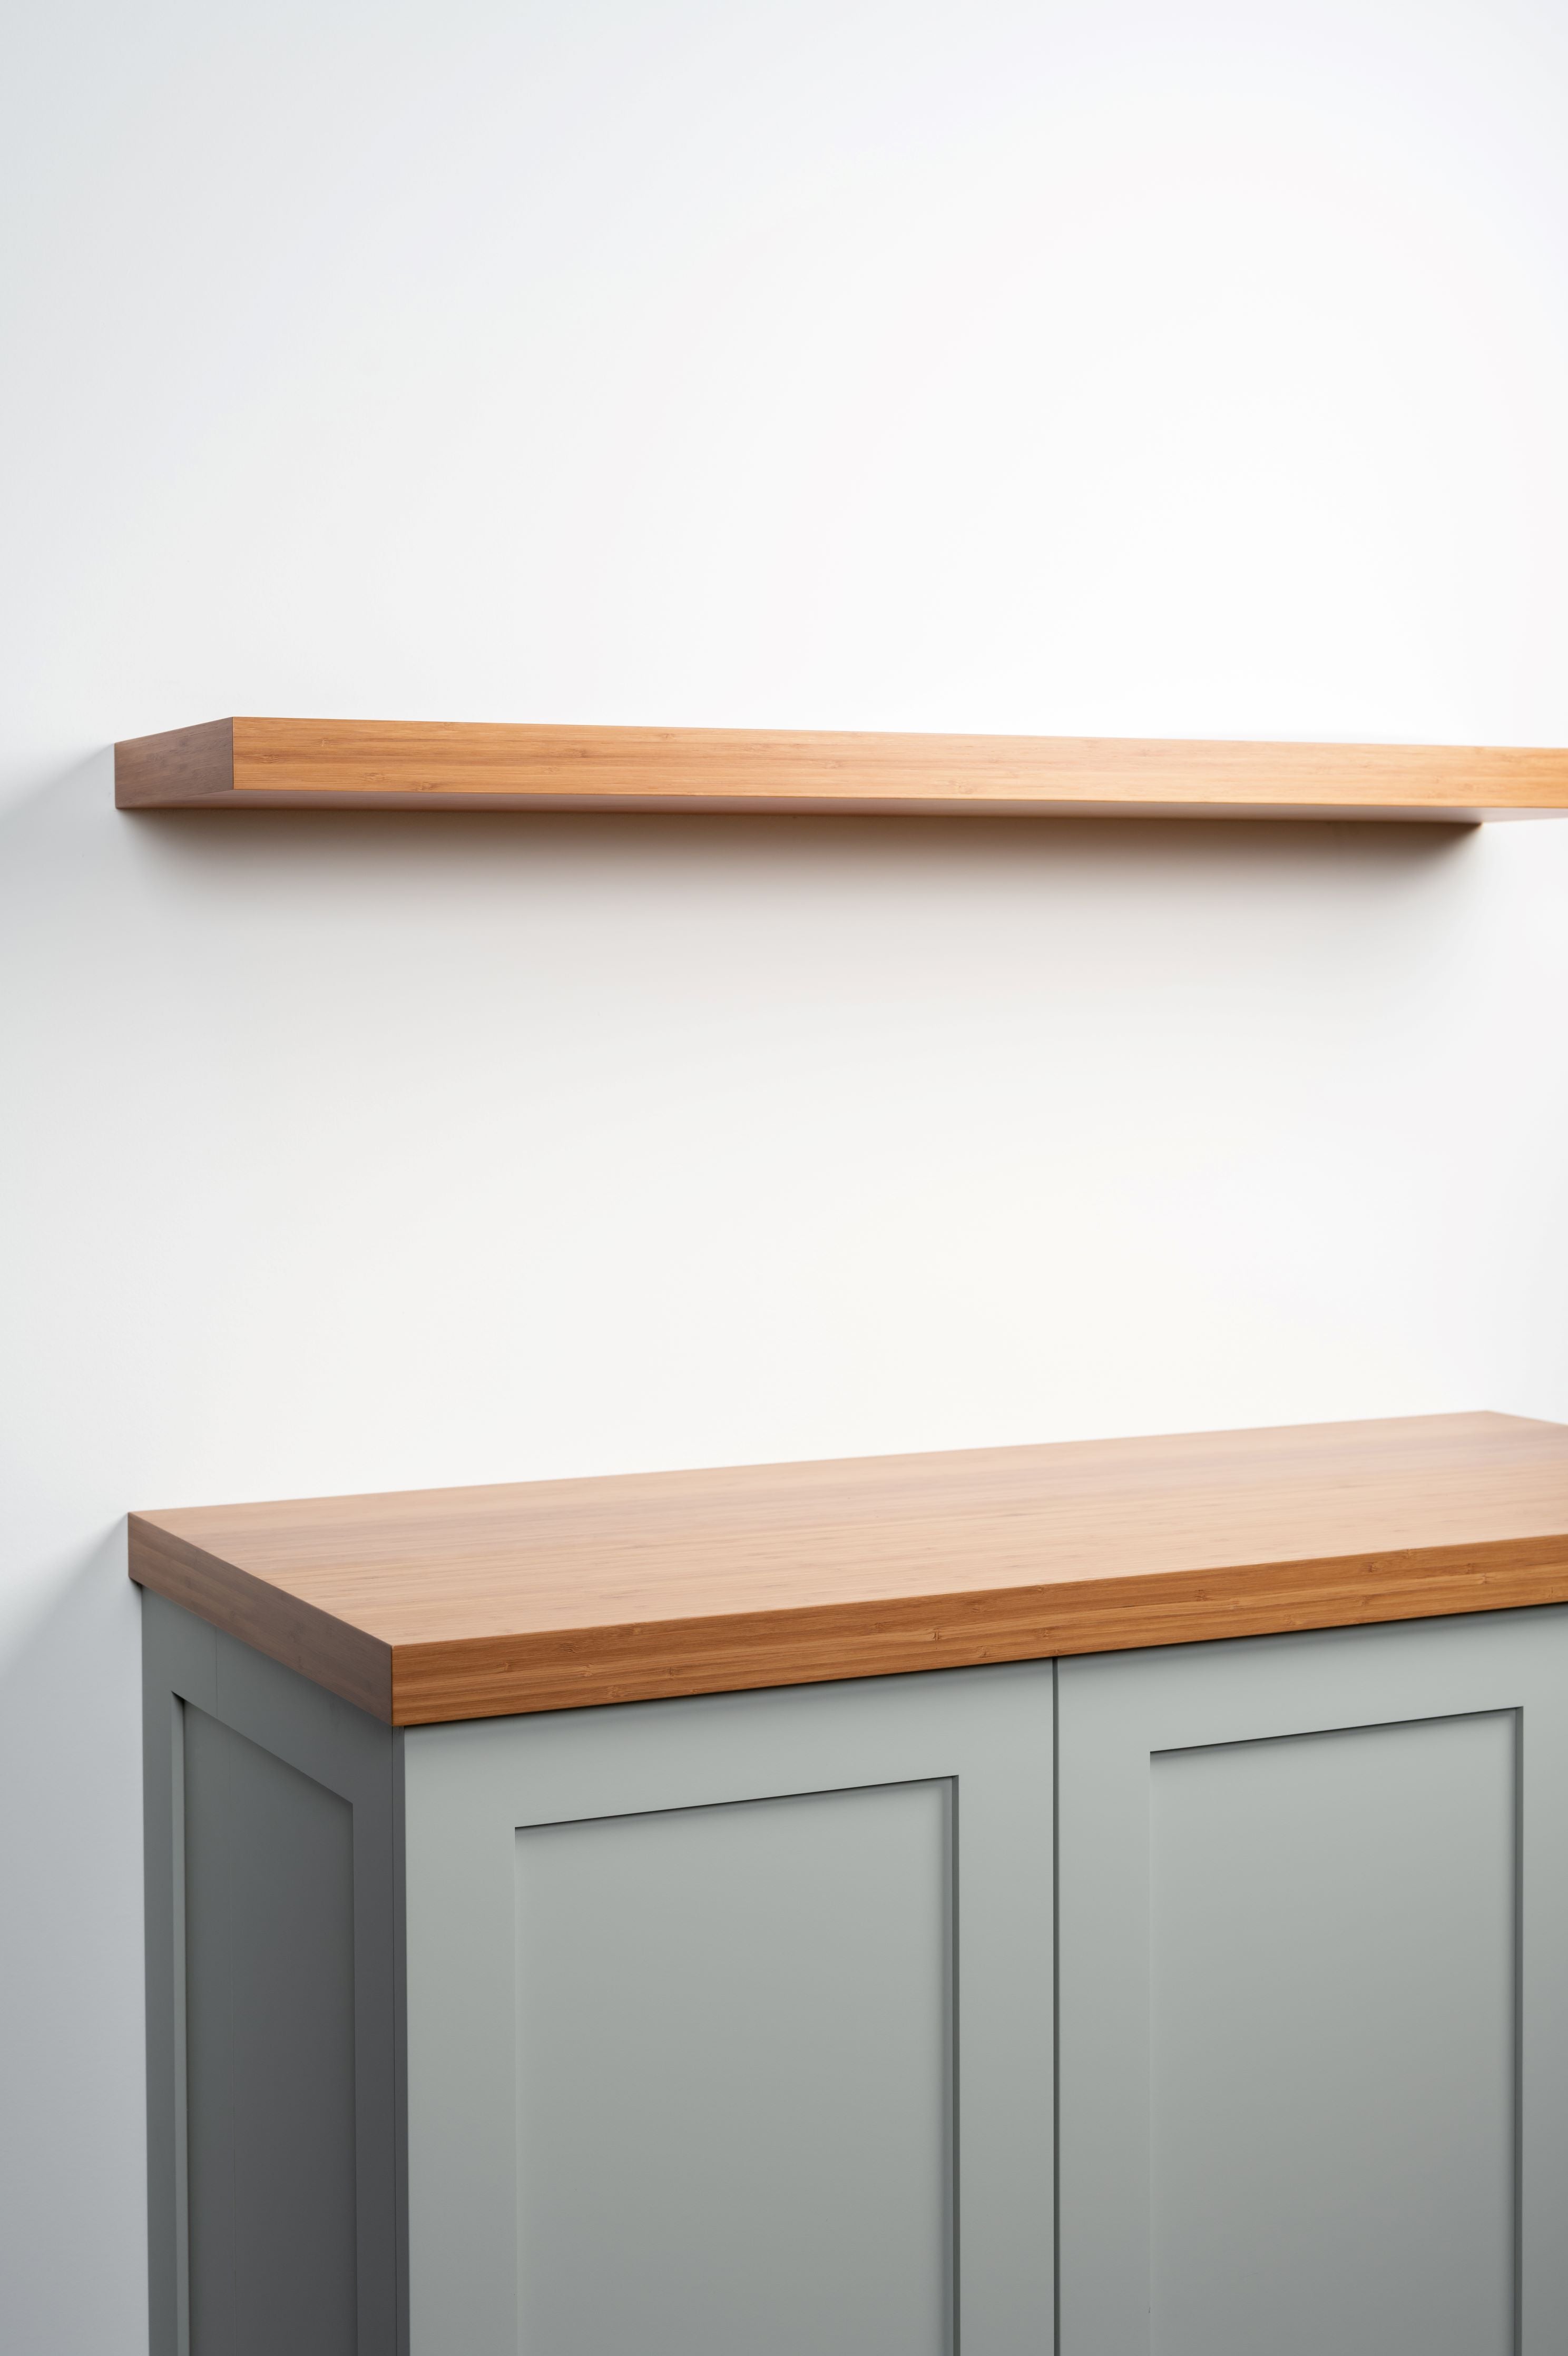 Bamboo 2-4" thick Cabinet Top / Slab Shelf